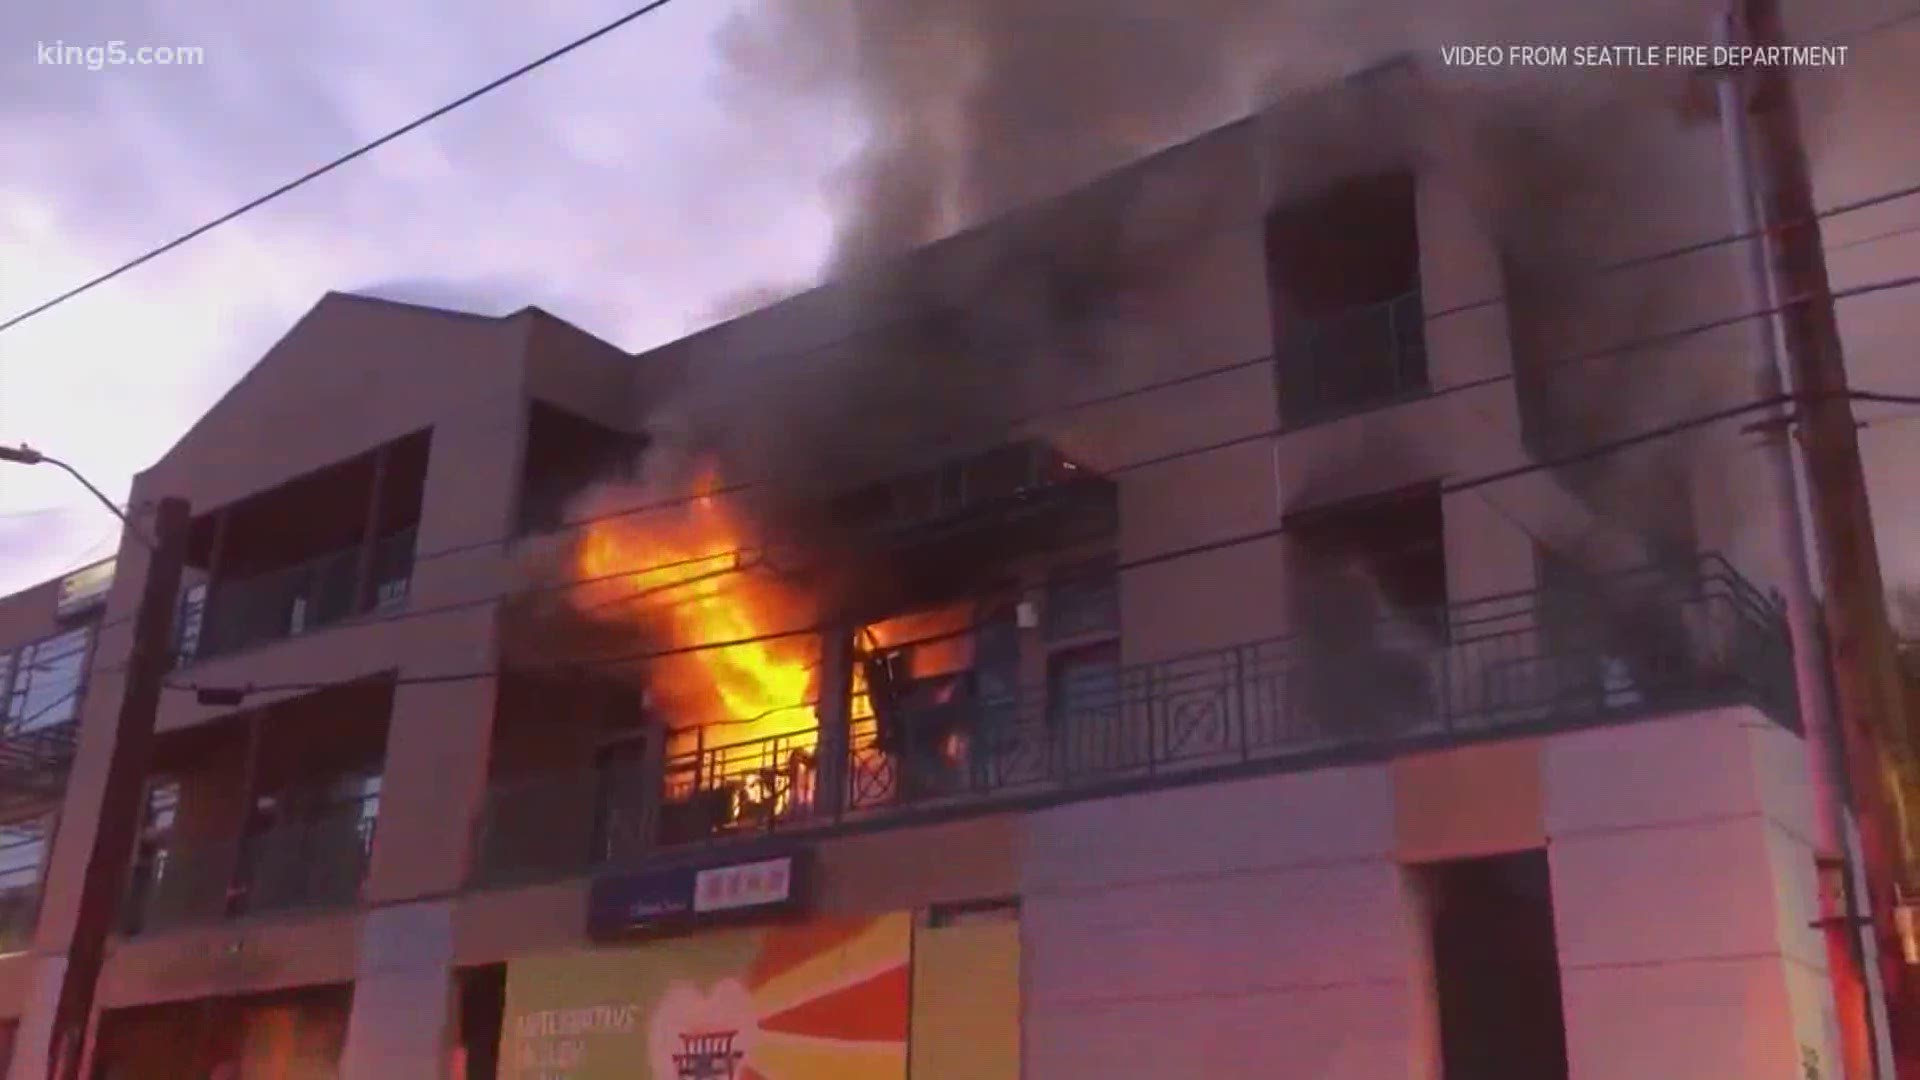 The fire is at a three-story shopping center in Seattle's Chinatown district.